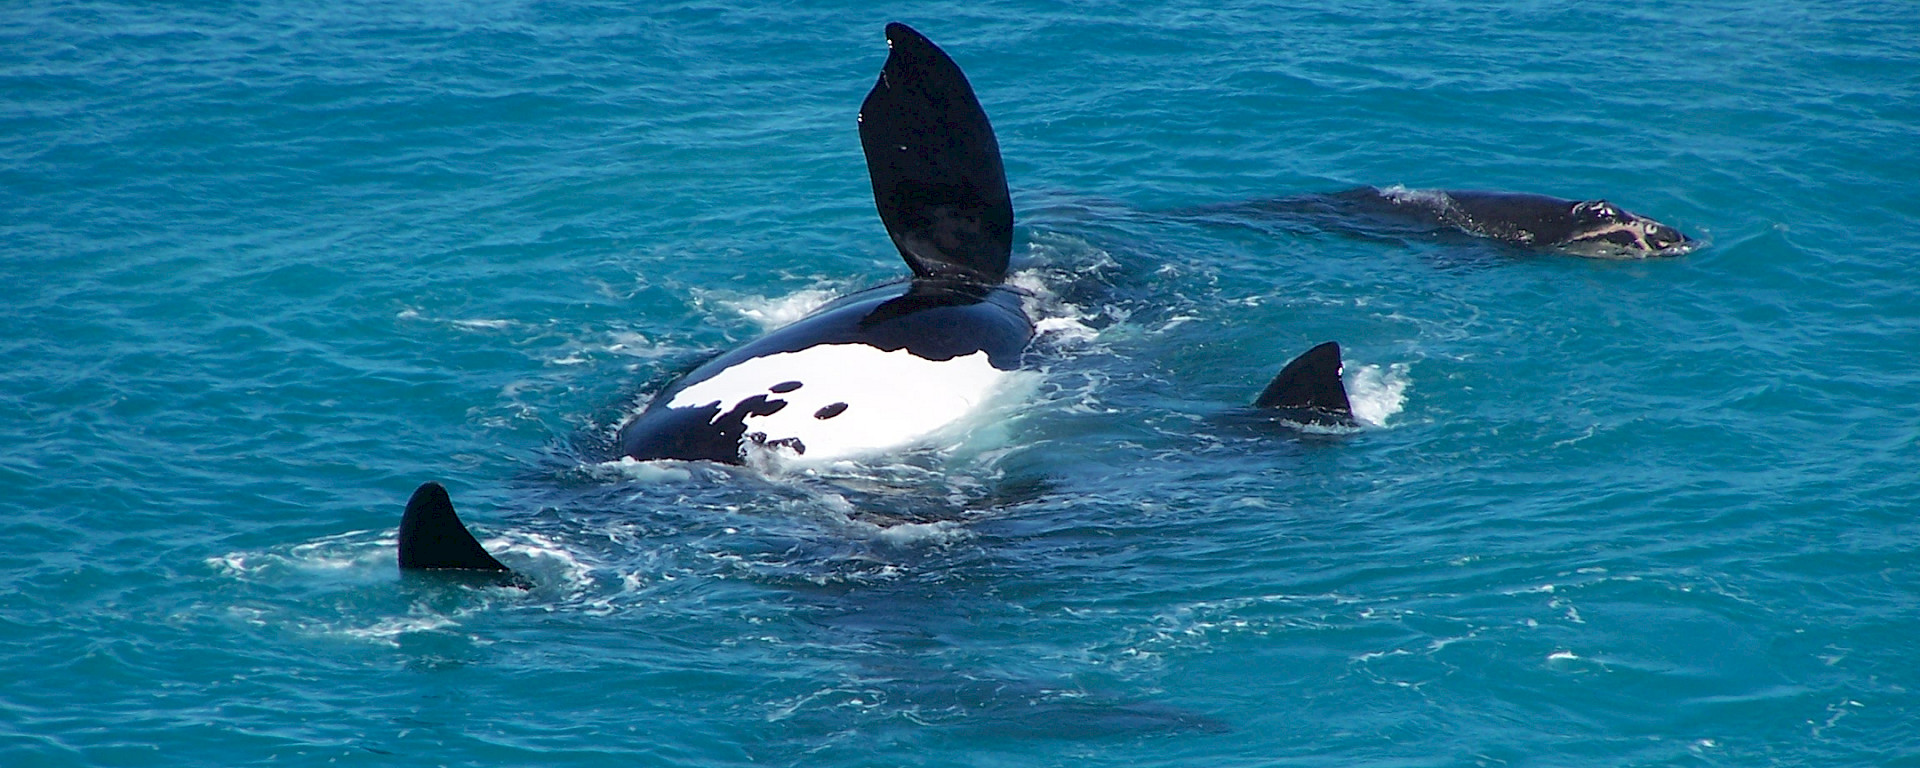 Southern right whale and calf surfacing